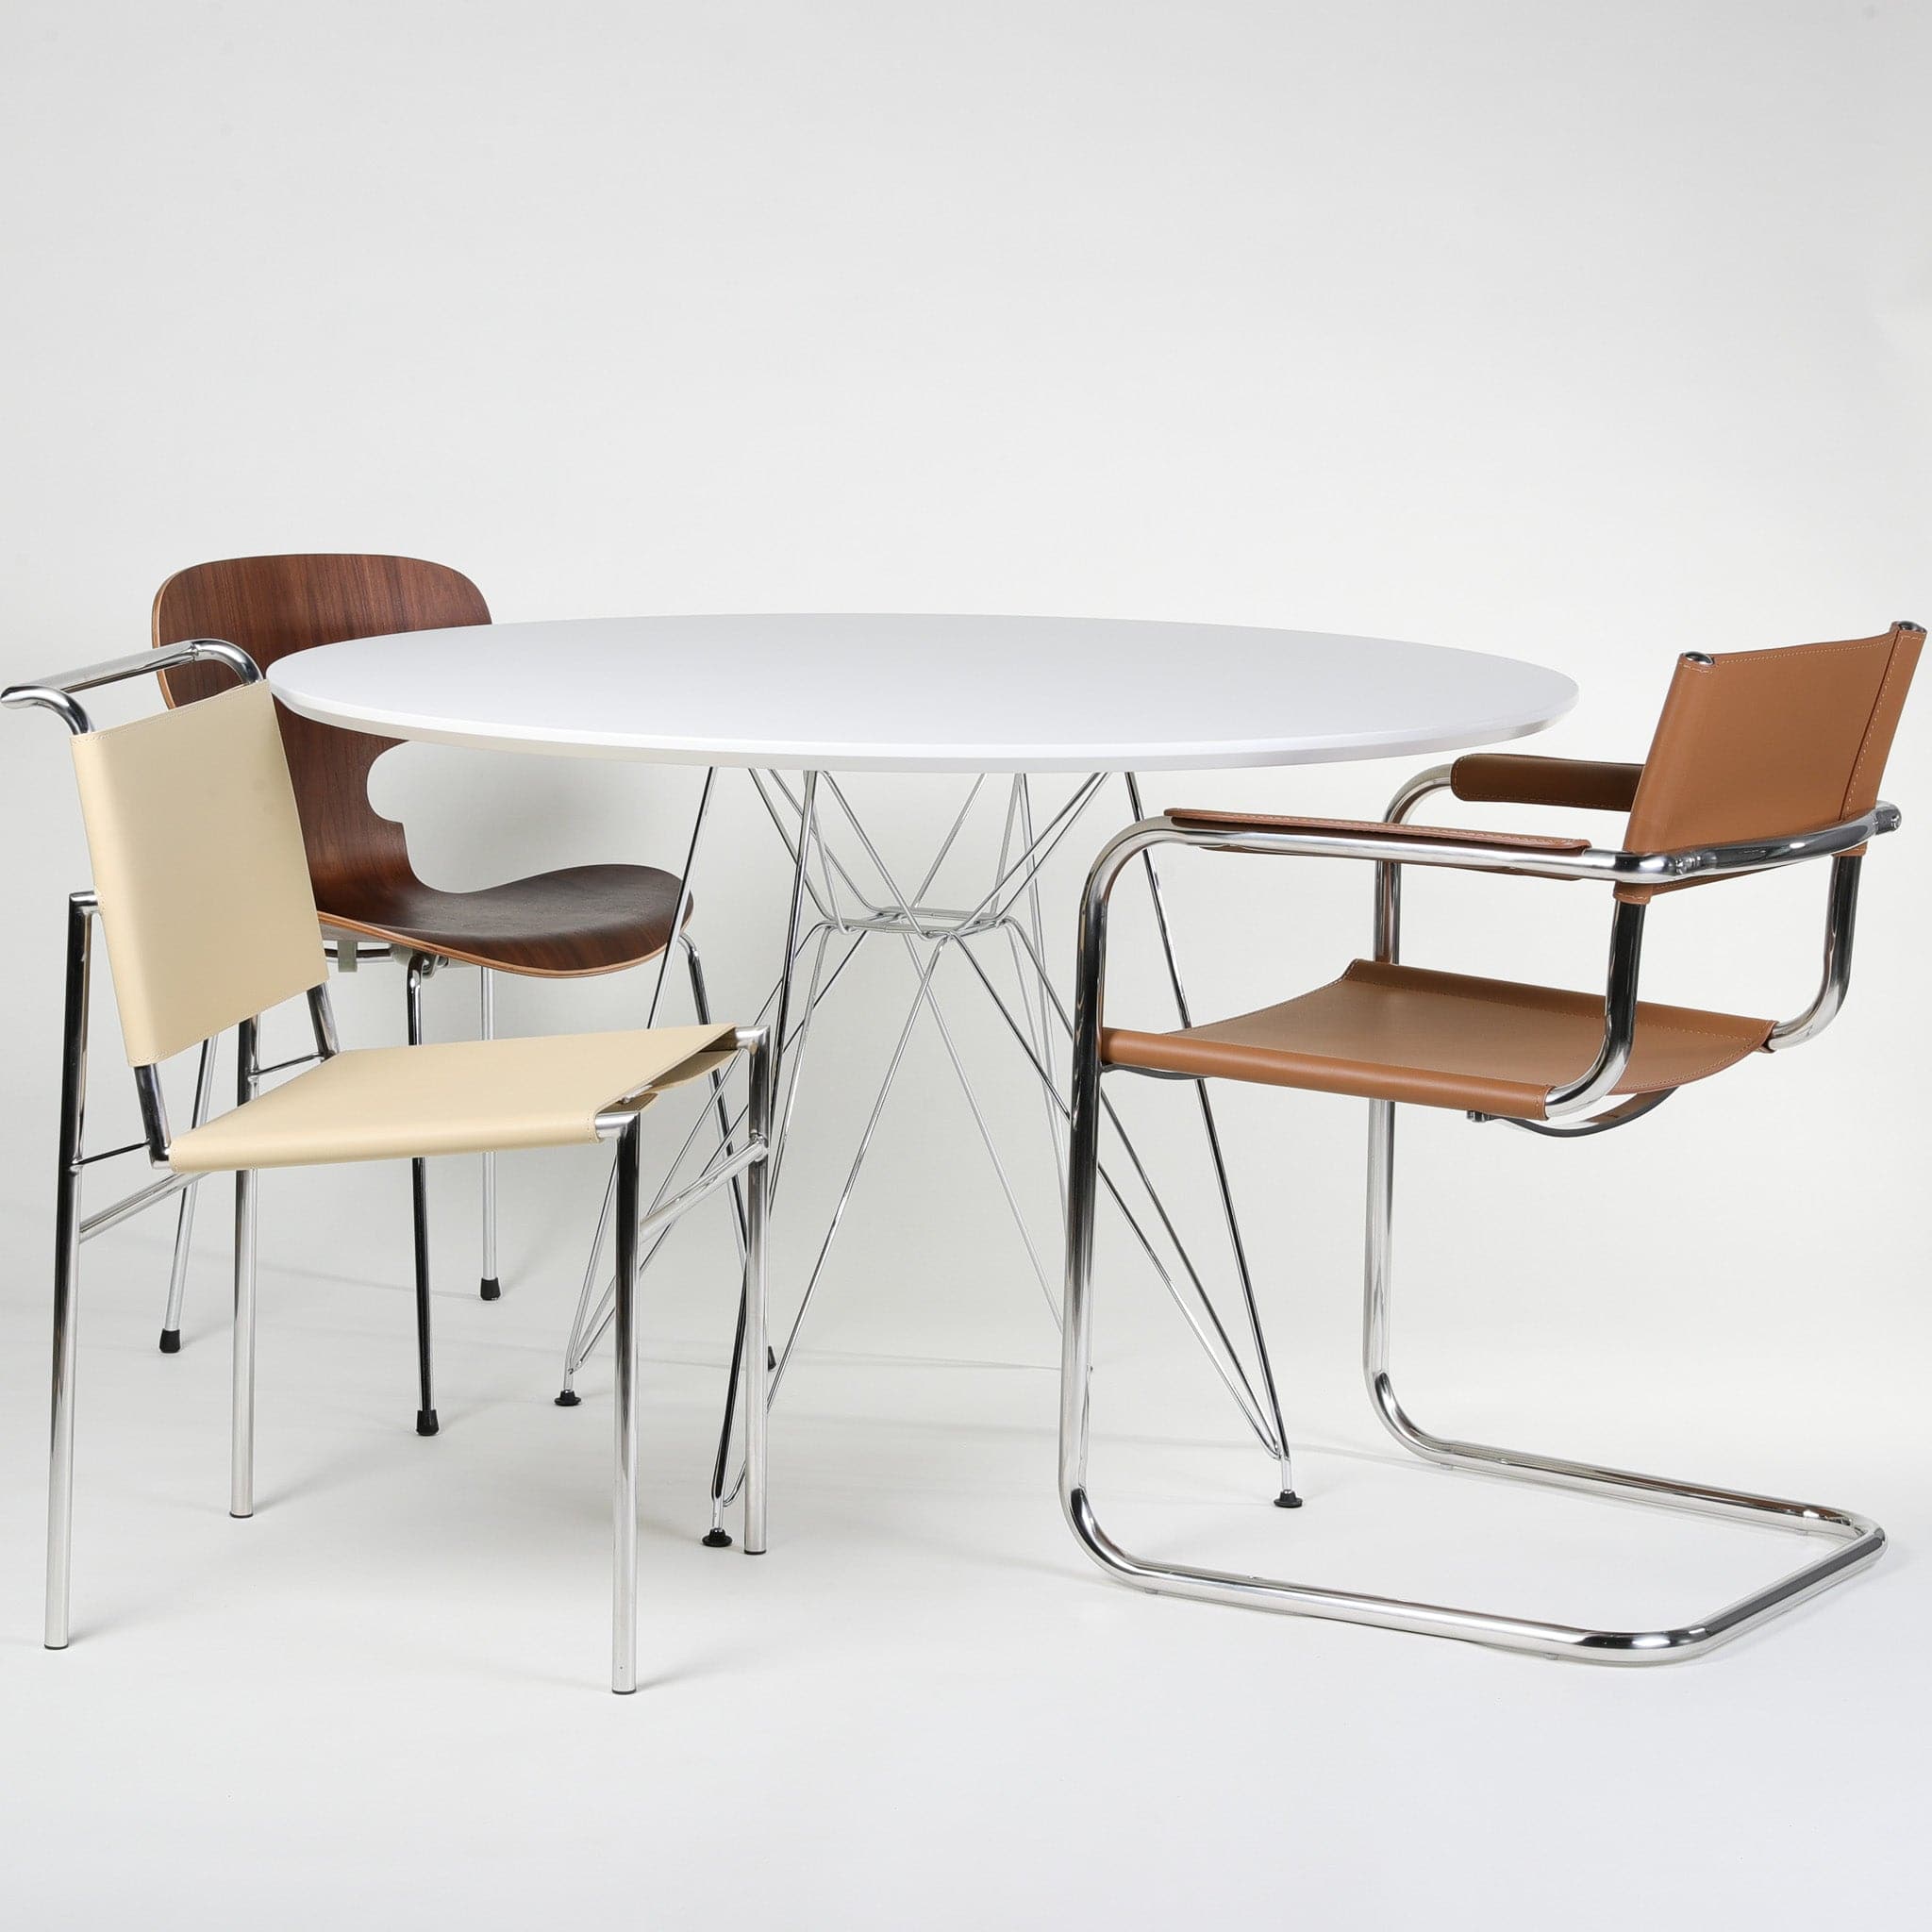 Retro Dining Table - The Feelter